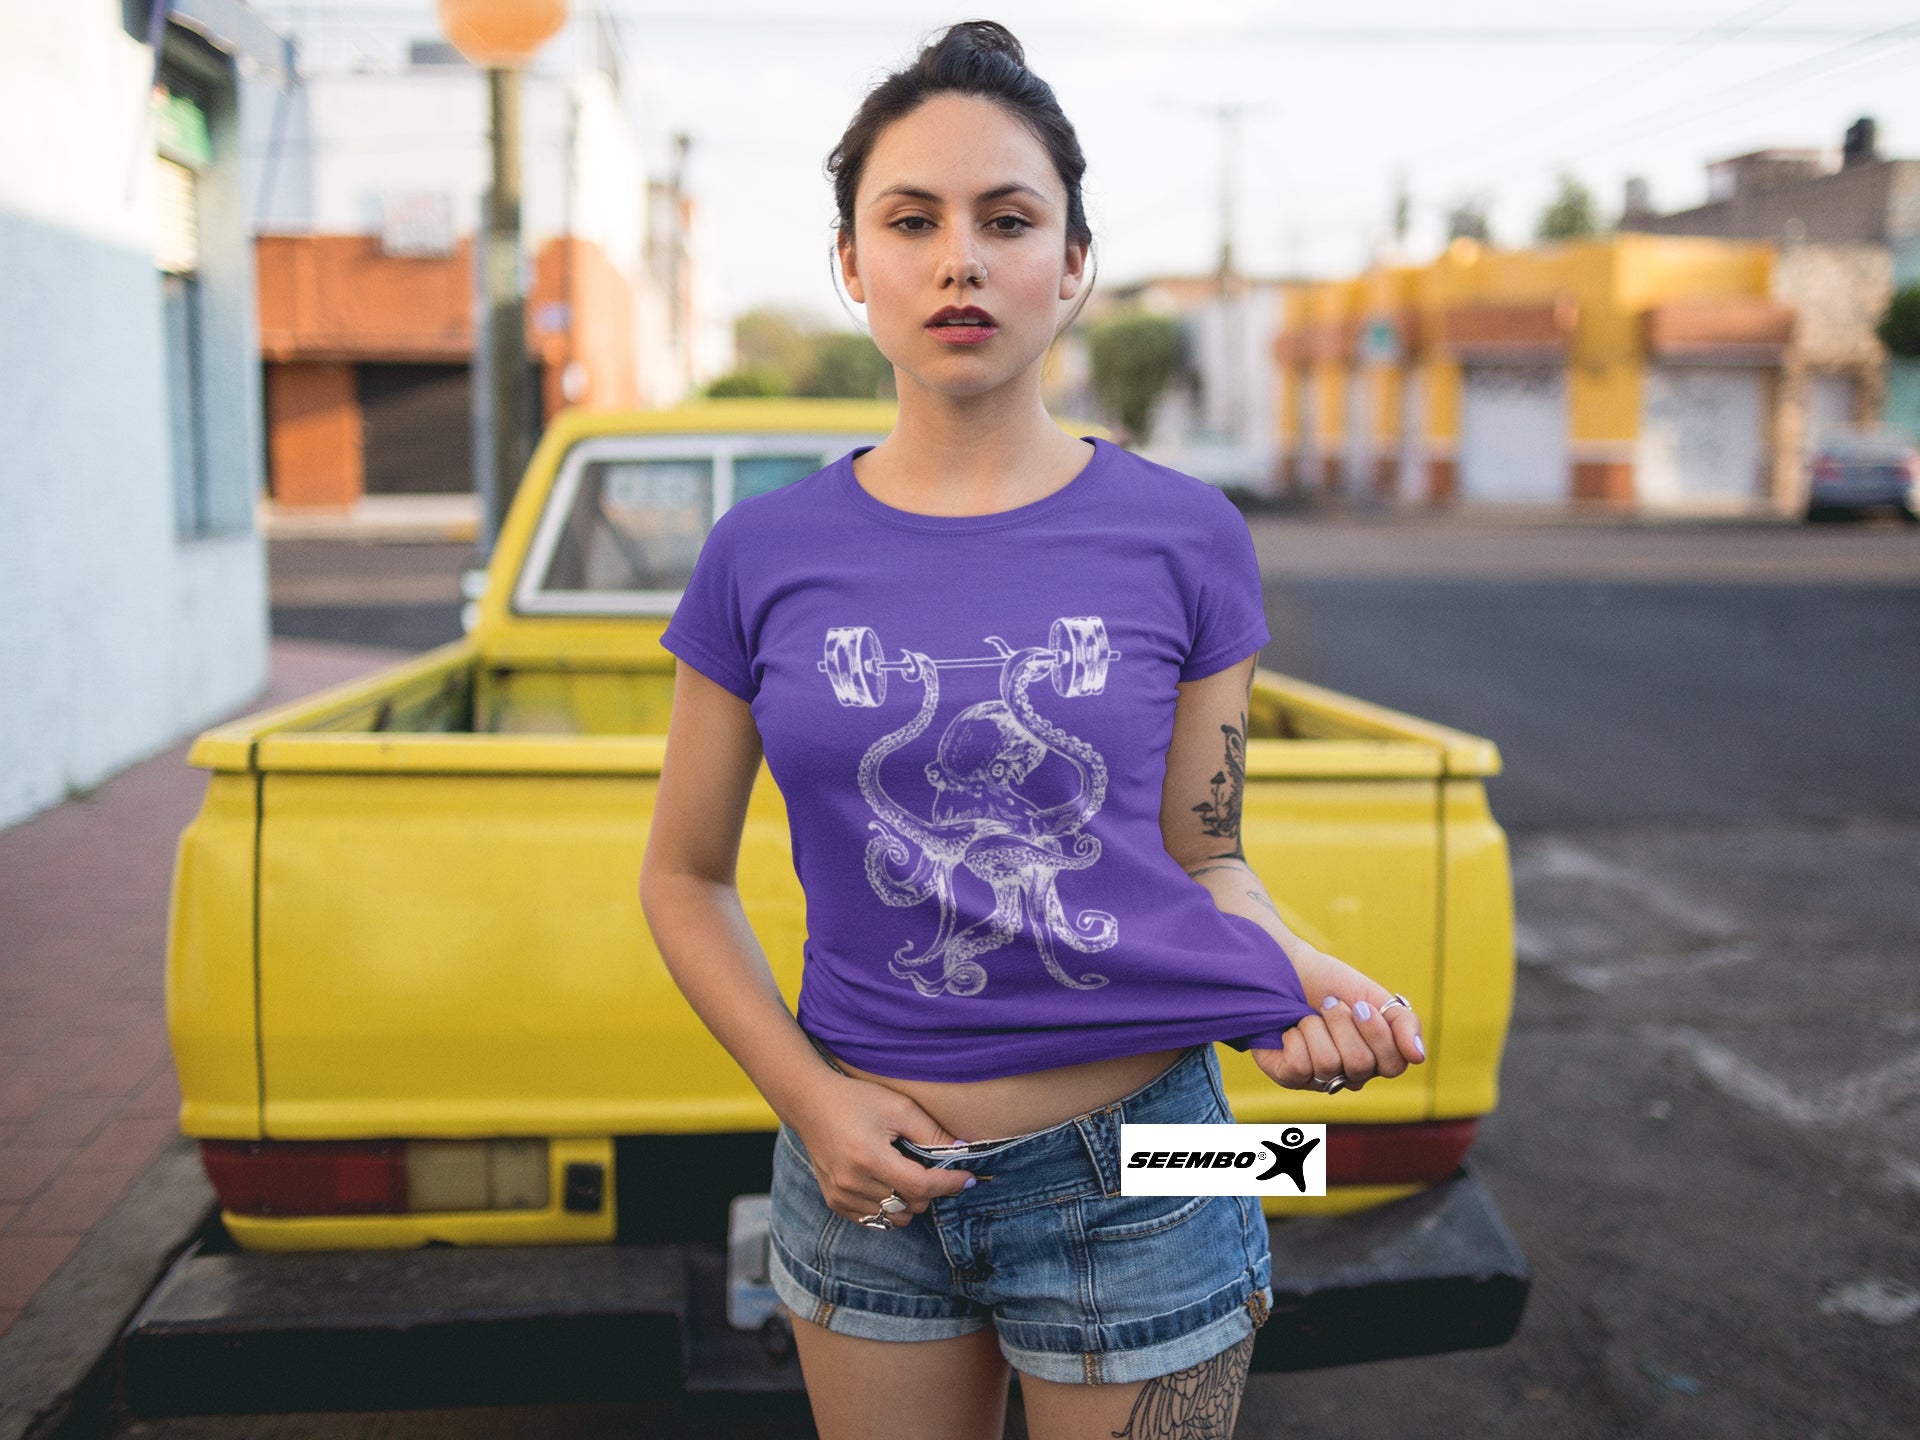 seembo-octopus-workout-barbells-fitness-purple-t-shirt-of-a-women-in-a-yellow-pick-up-truck-ipe204